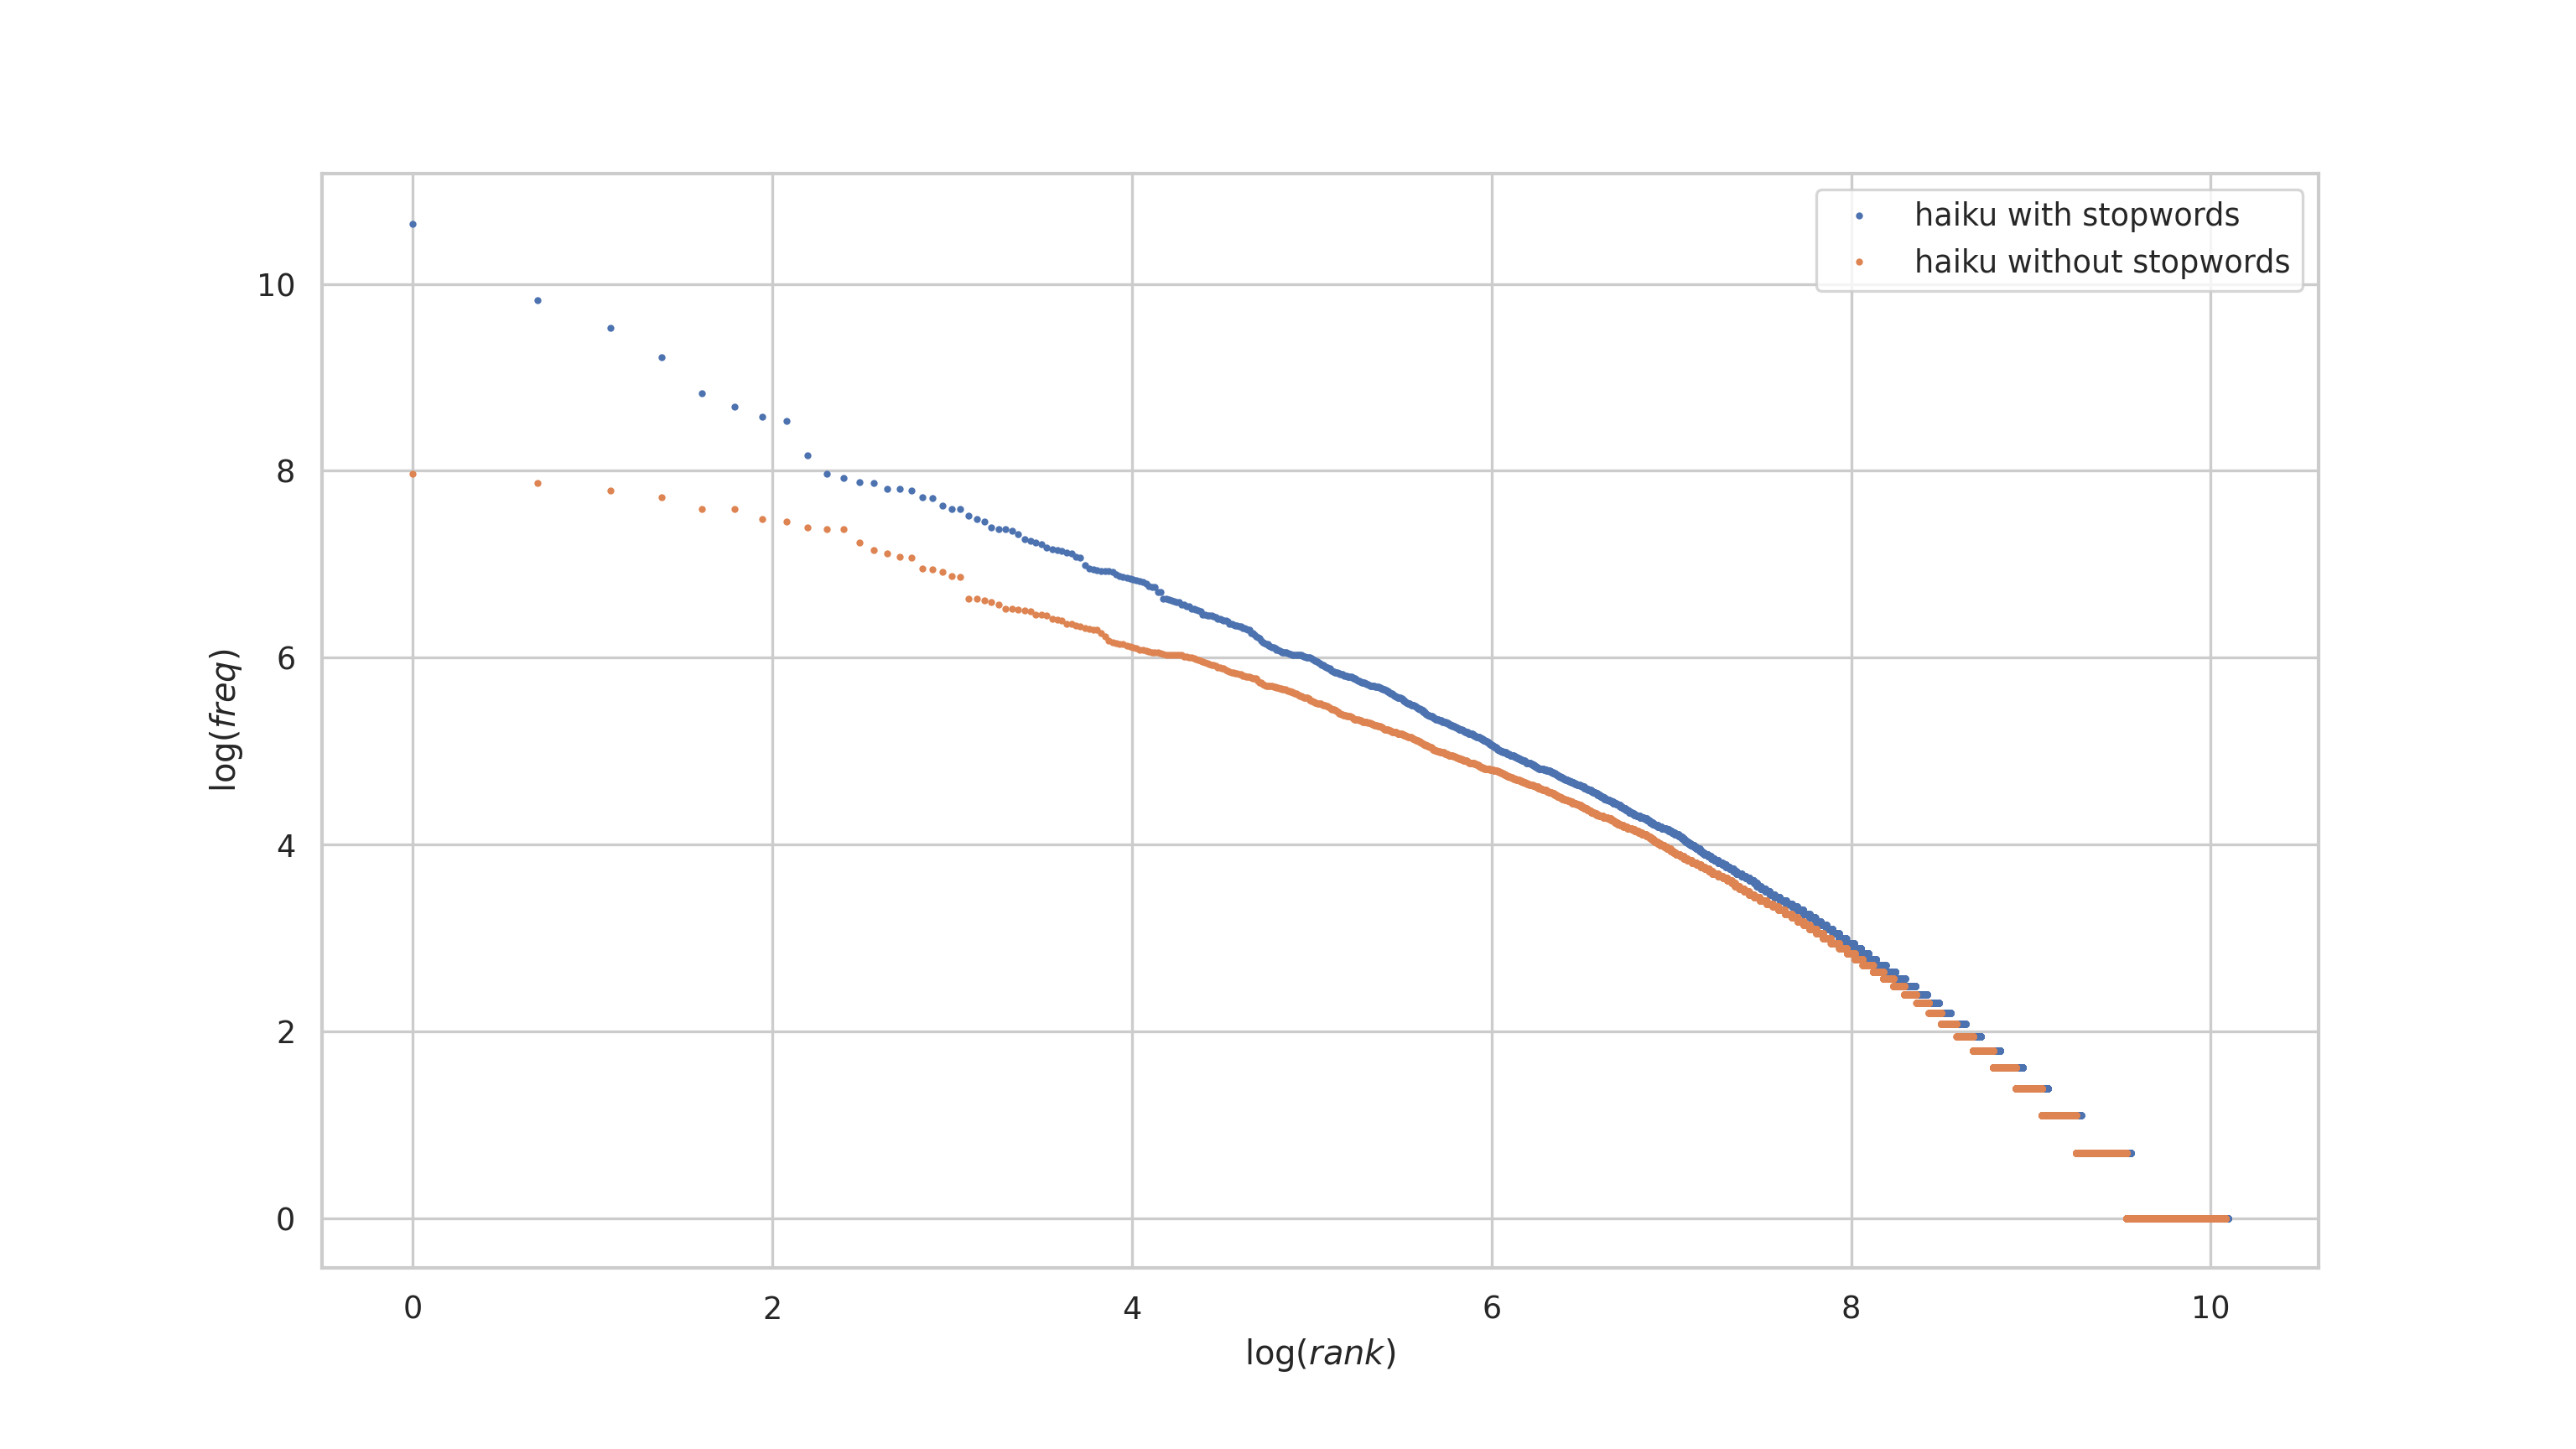 The haiku log-log rank vs frequency plot with and without stopwords